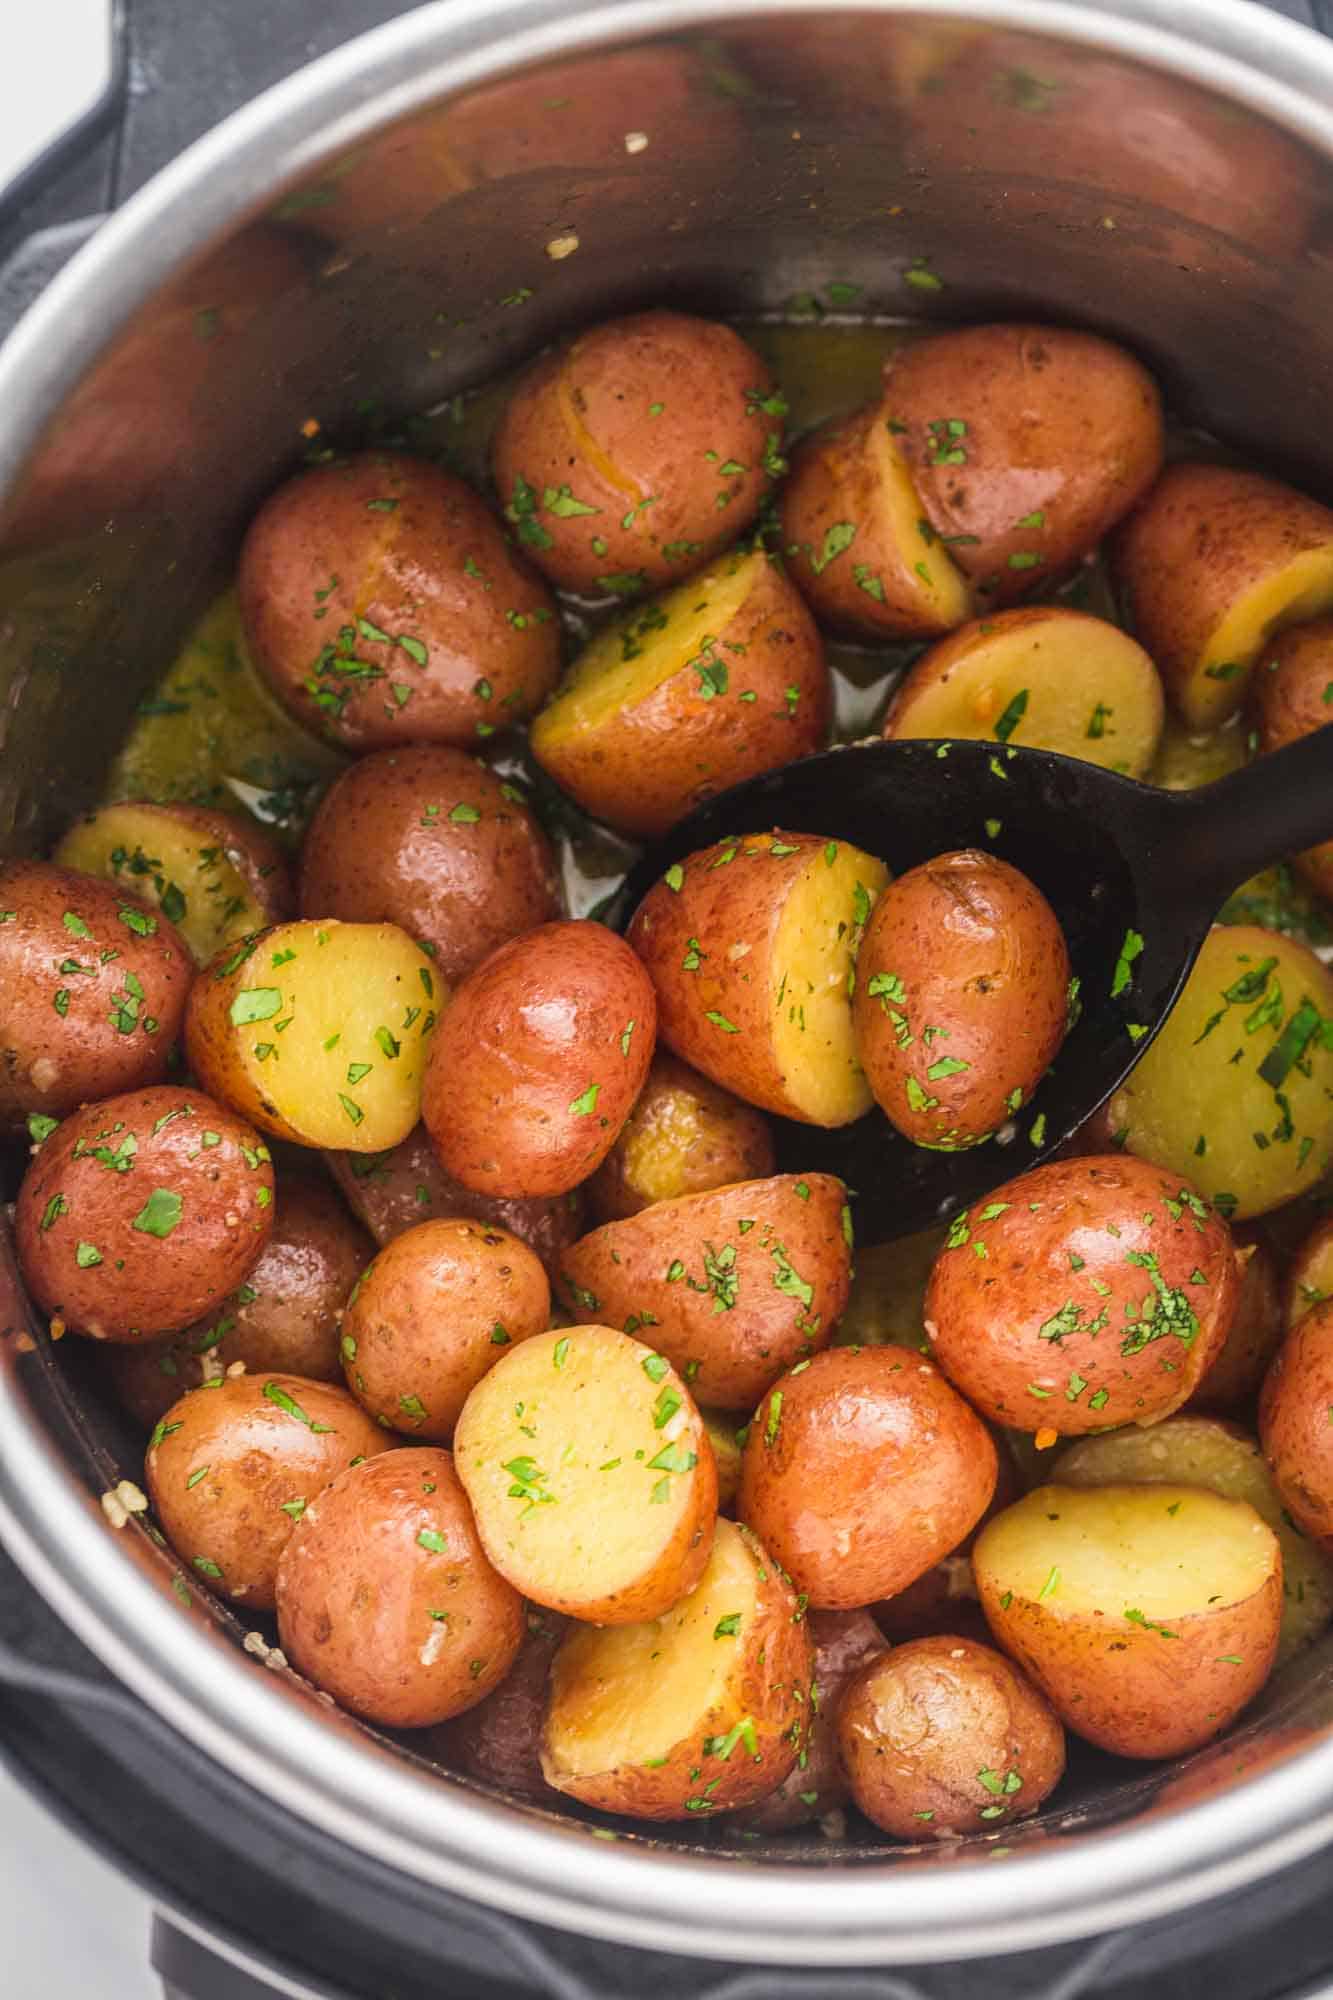 Cooked red potatoes in the instant pot with a serving spoon